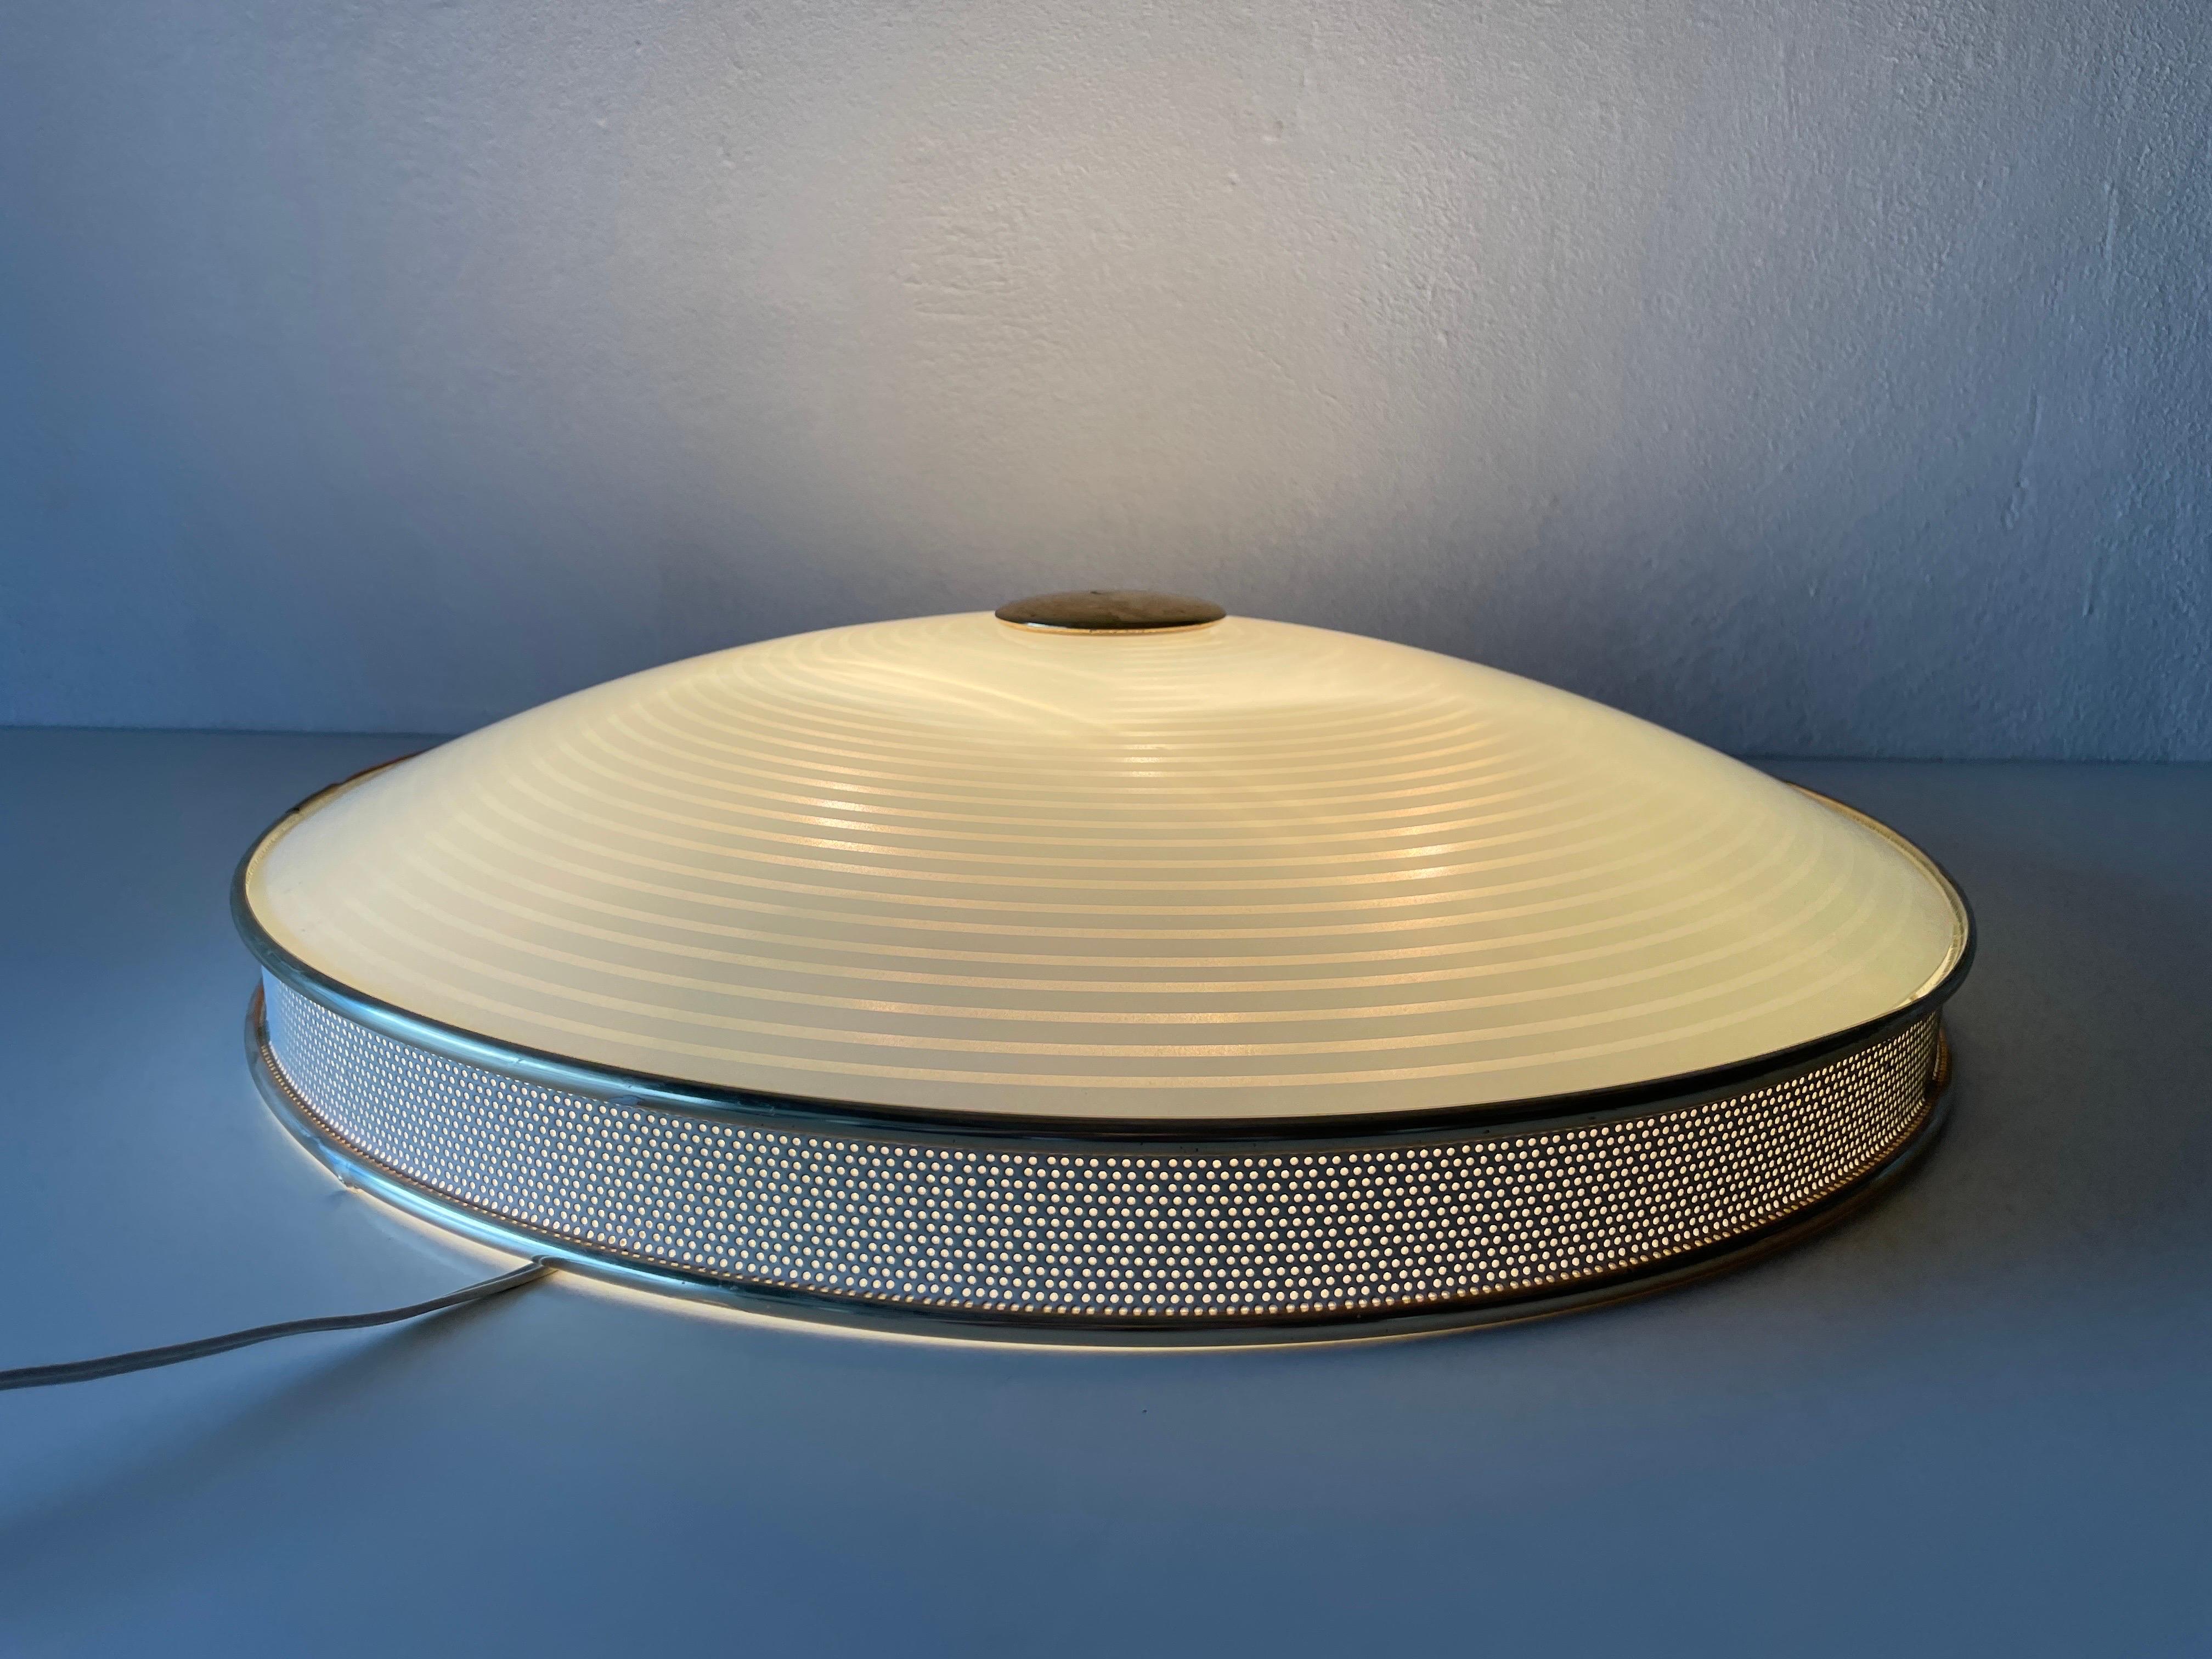 Ufo Design Glass Metal Flush Mount Ceiling Lamp by Hillebrand, 1950s, Germany For Sale 7